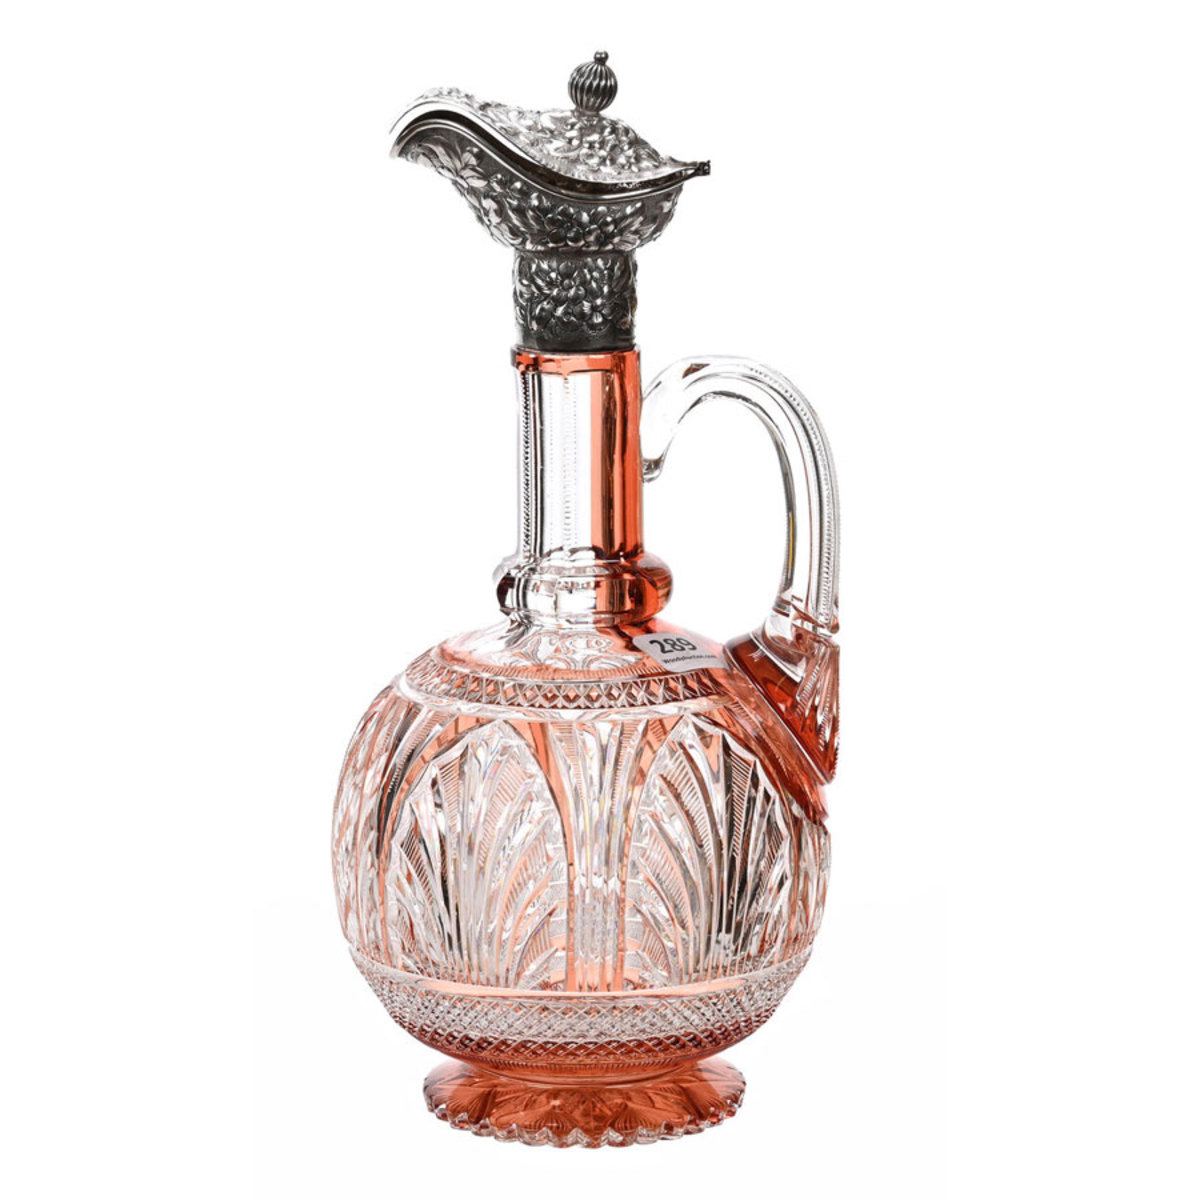 Brilliant Period Cut Glass handled decanter, apricot cut to clear, 11" h, with a beautiful embossed floral sterling silver lidded spout marked Theodore B. Starr and a scalloped pattern cut foot. Estimate: $2,000-$4,000.